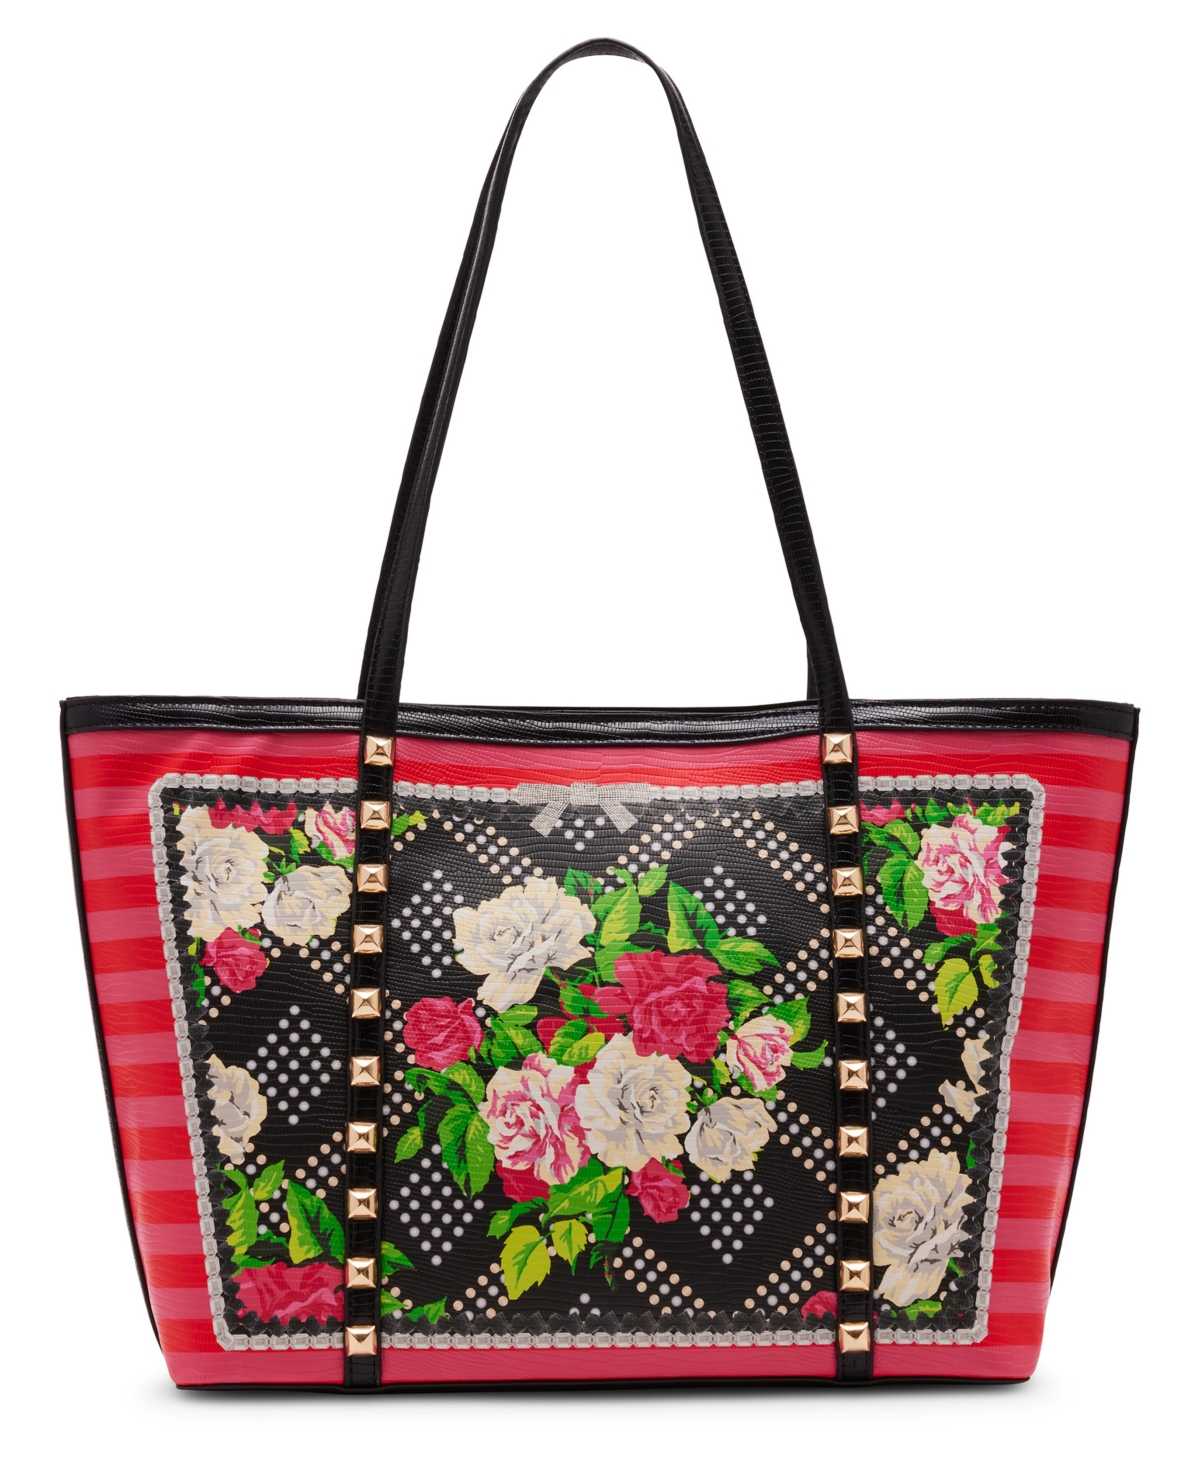 Betsey Johnson Floral Stud Tote